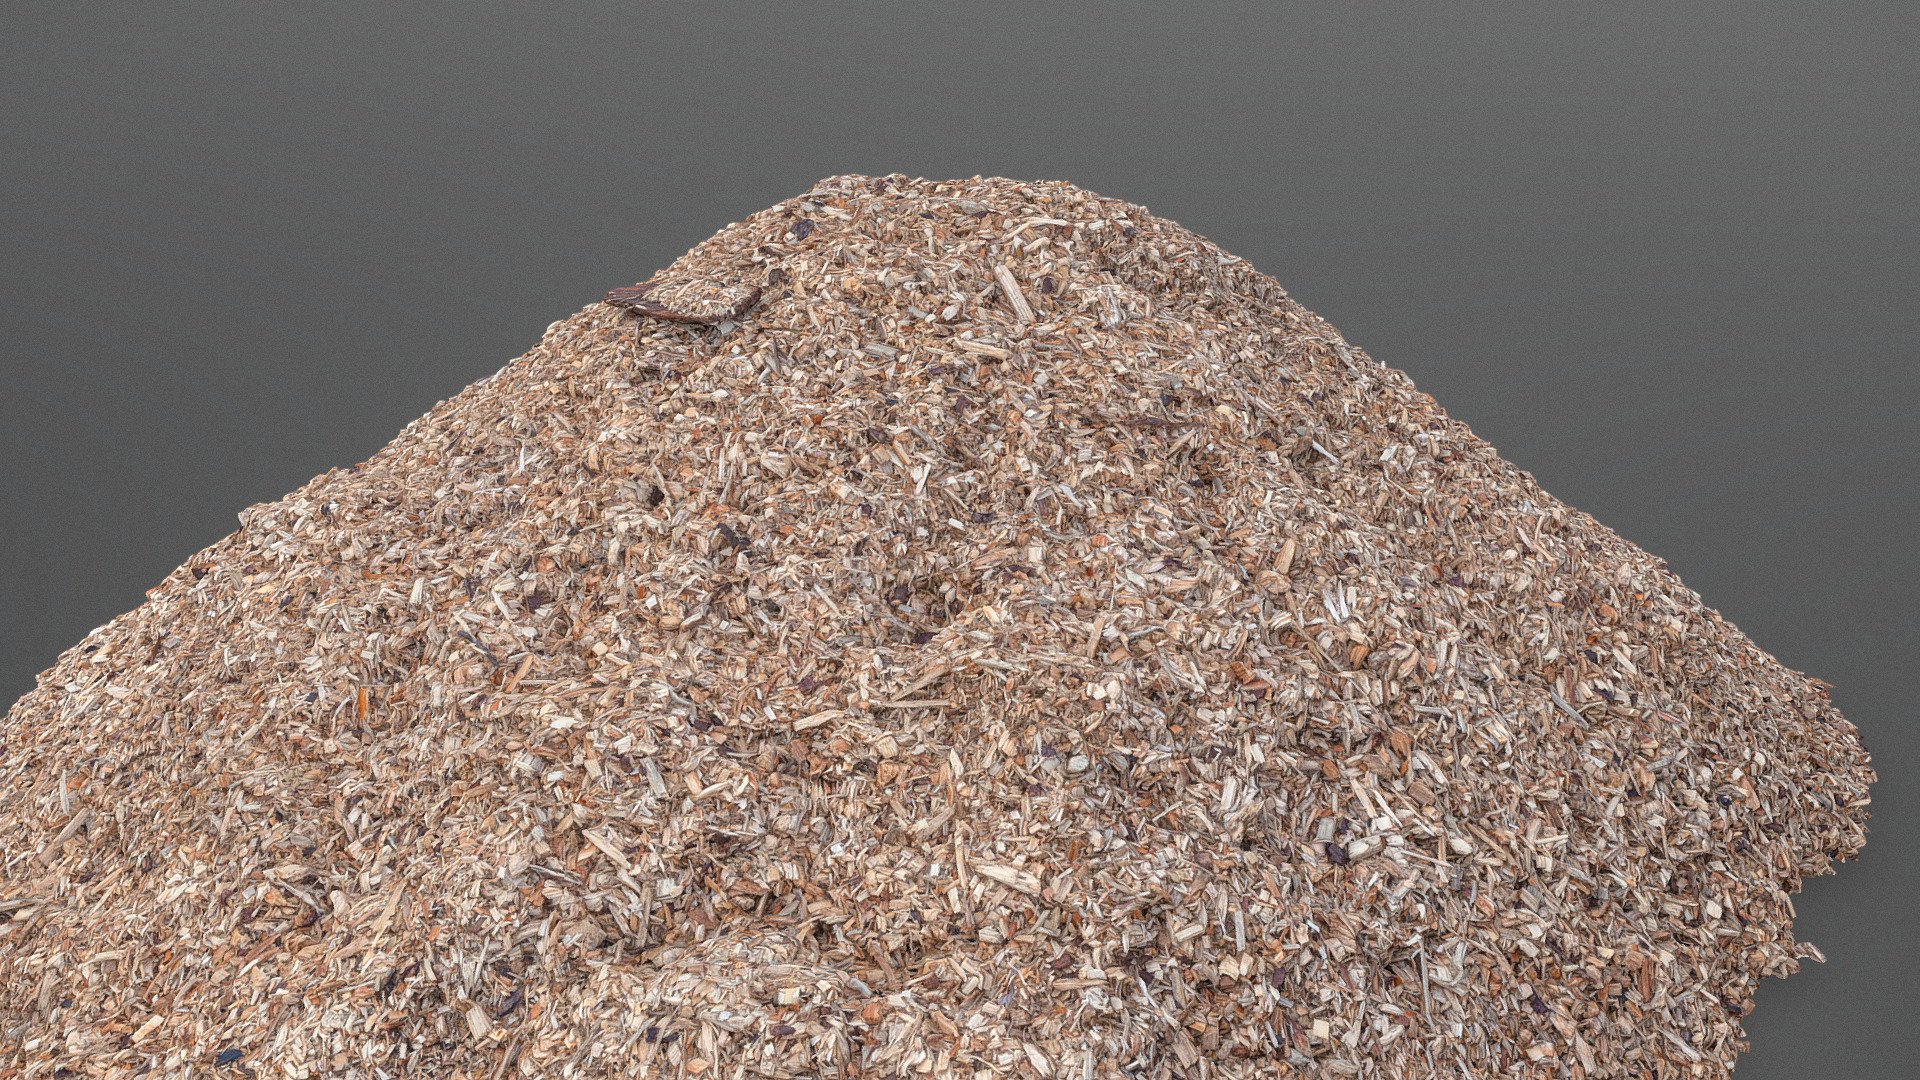 Wood woodchips wooden chips shards mulch pulp bark pile heap

photogrammetry scan (150x24mp), 2x16k textures + hd normals  (as additional .zip download) - Wood chips pile - Buy Royalty Free 3D model by matousekfoto 3d model